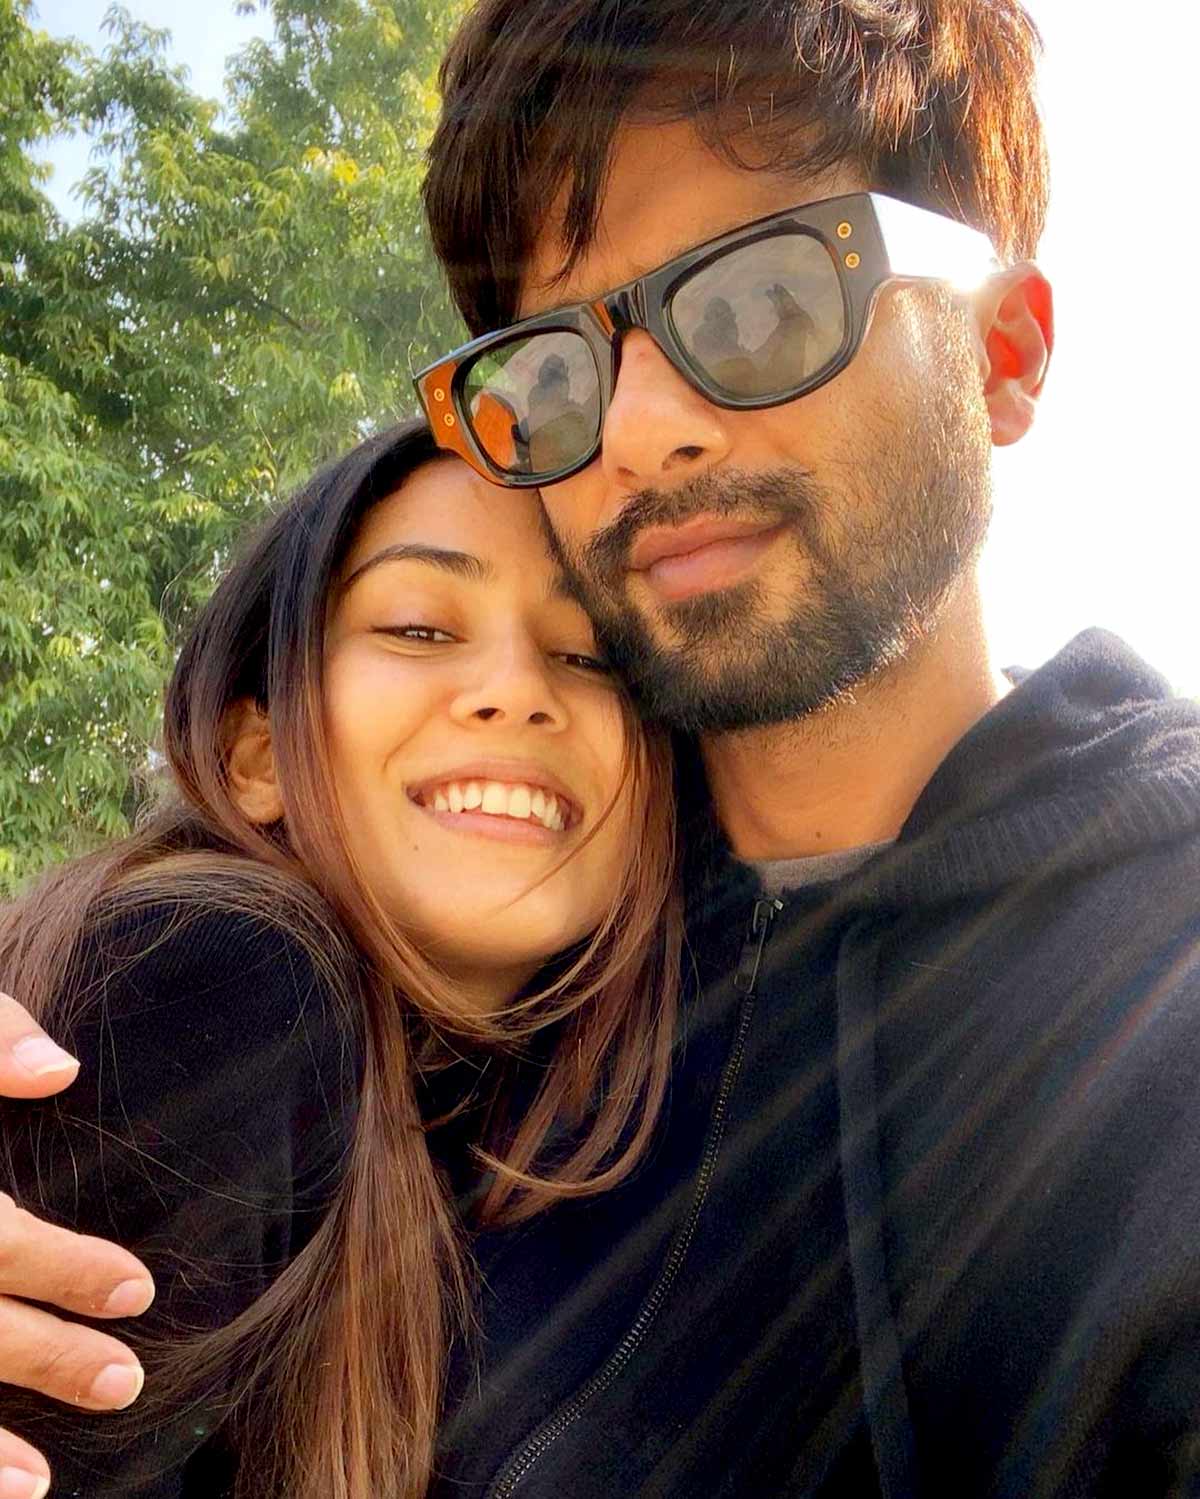 Vikrant Massey, Wife Sheetal Thakur Expecting Their First Child: Report